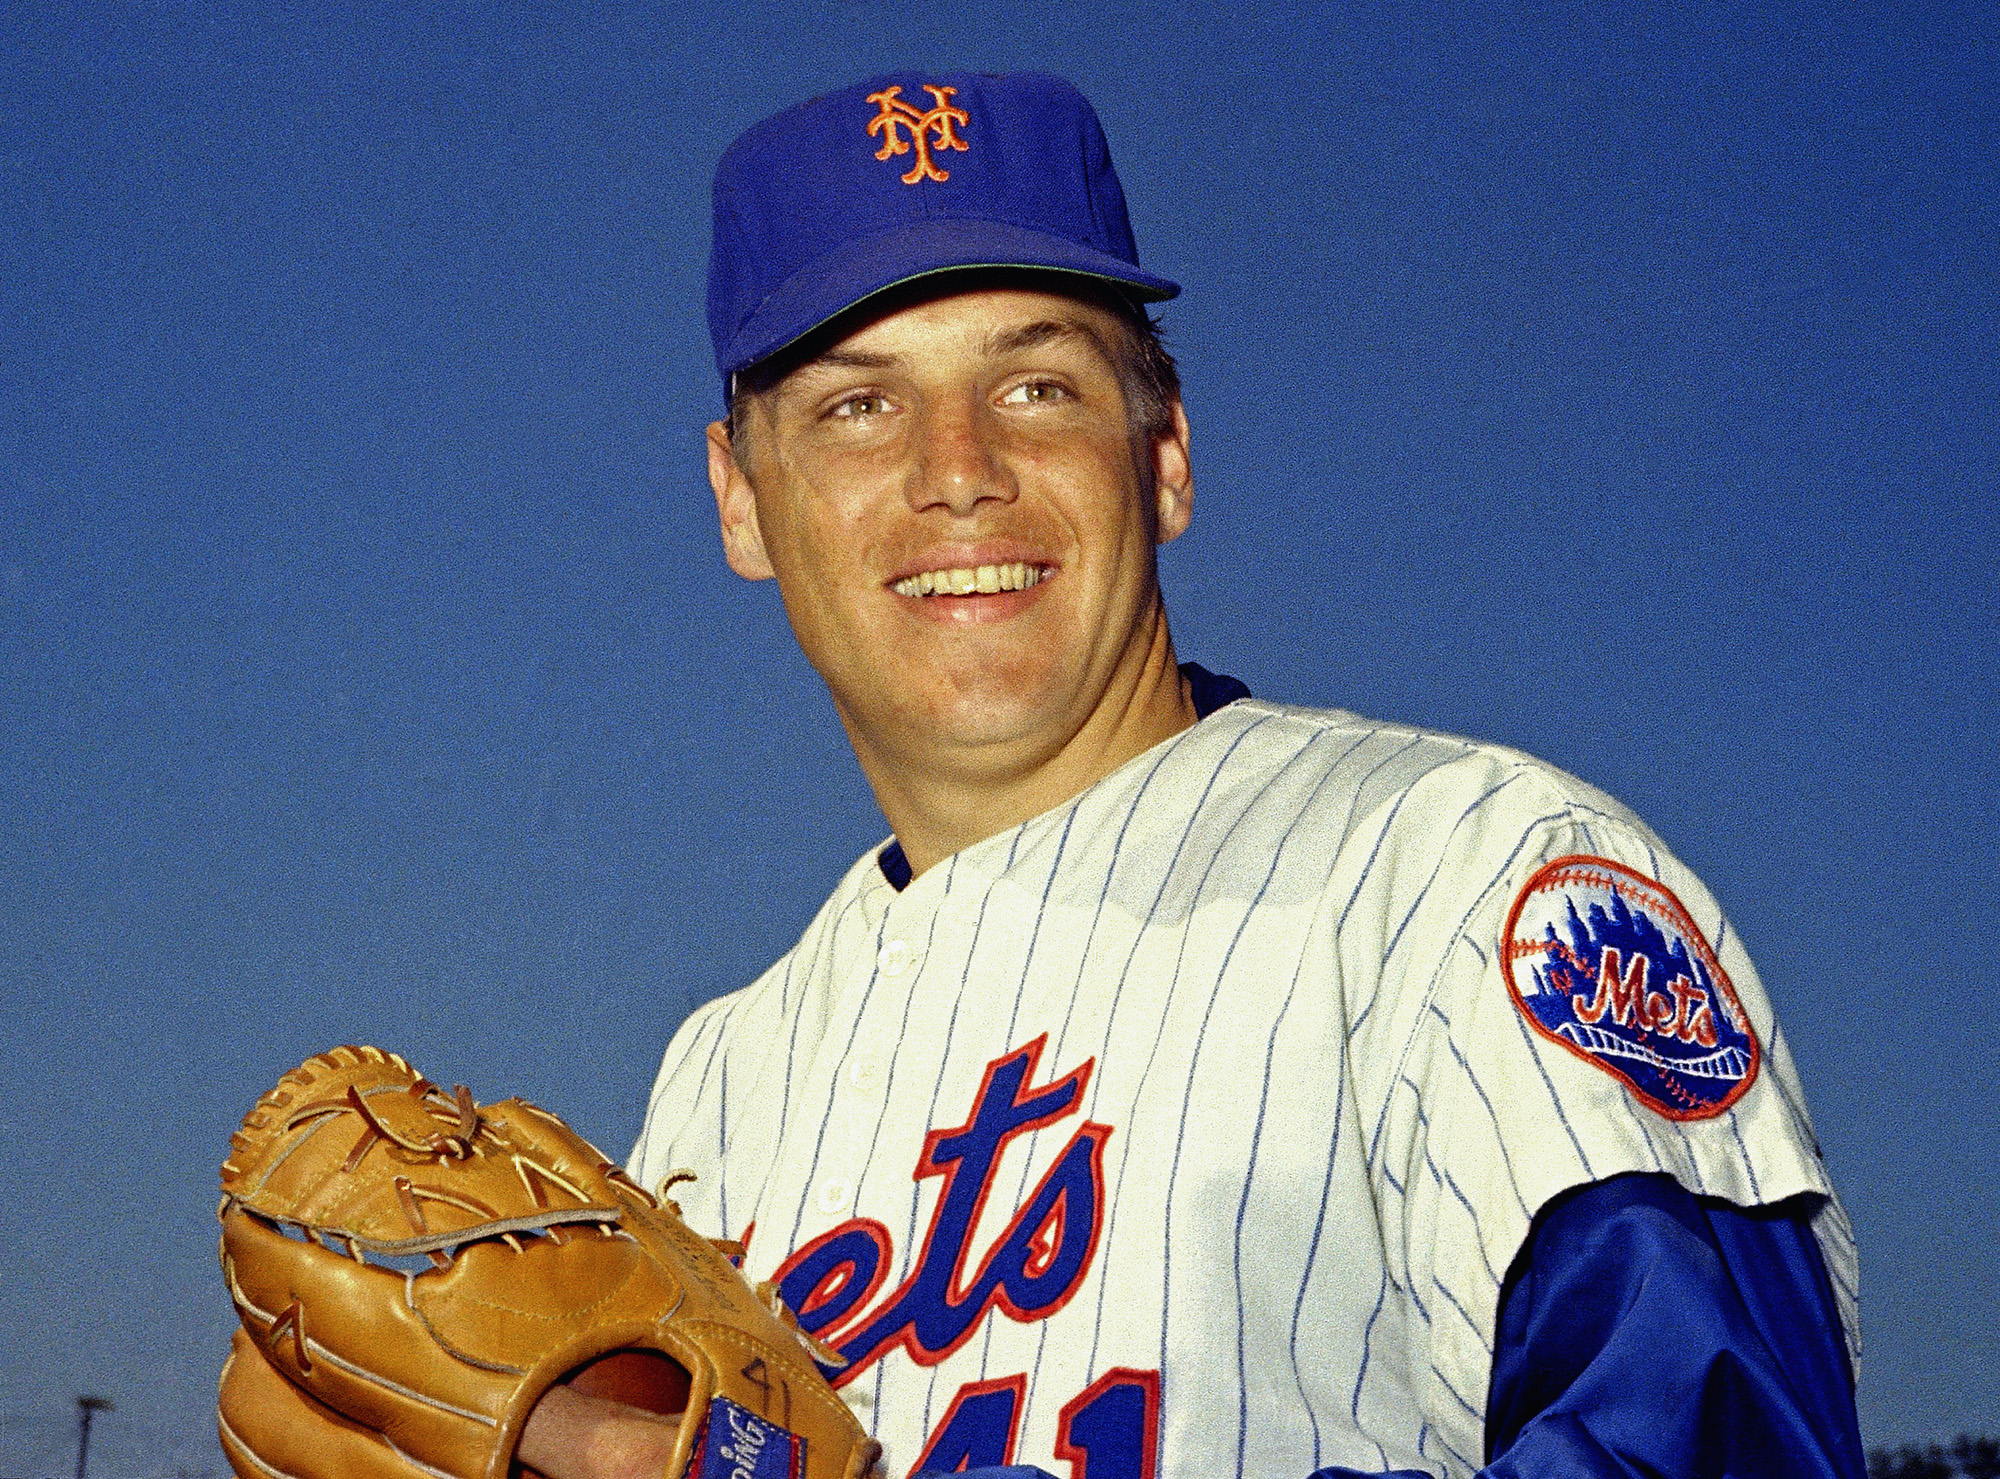 NY Mets: Return to black uniforms is a time to recall good memories